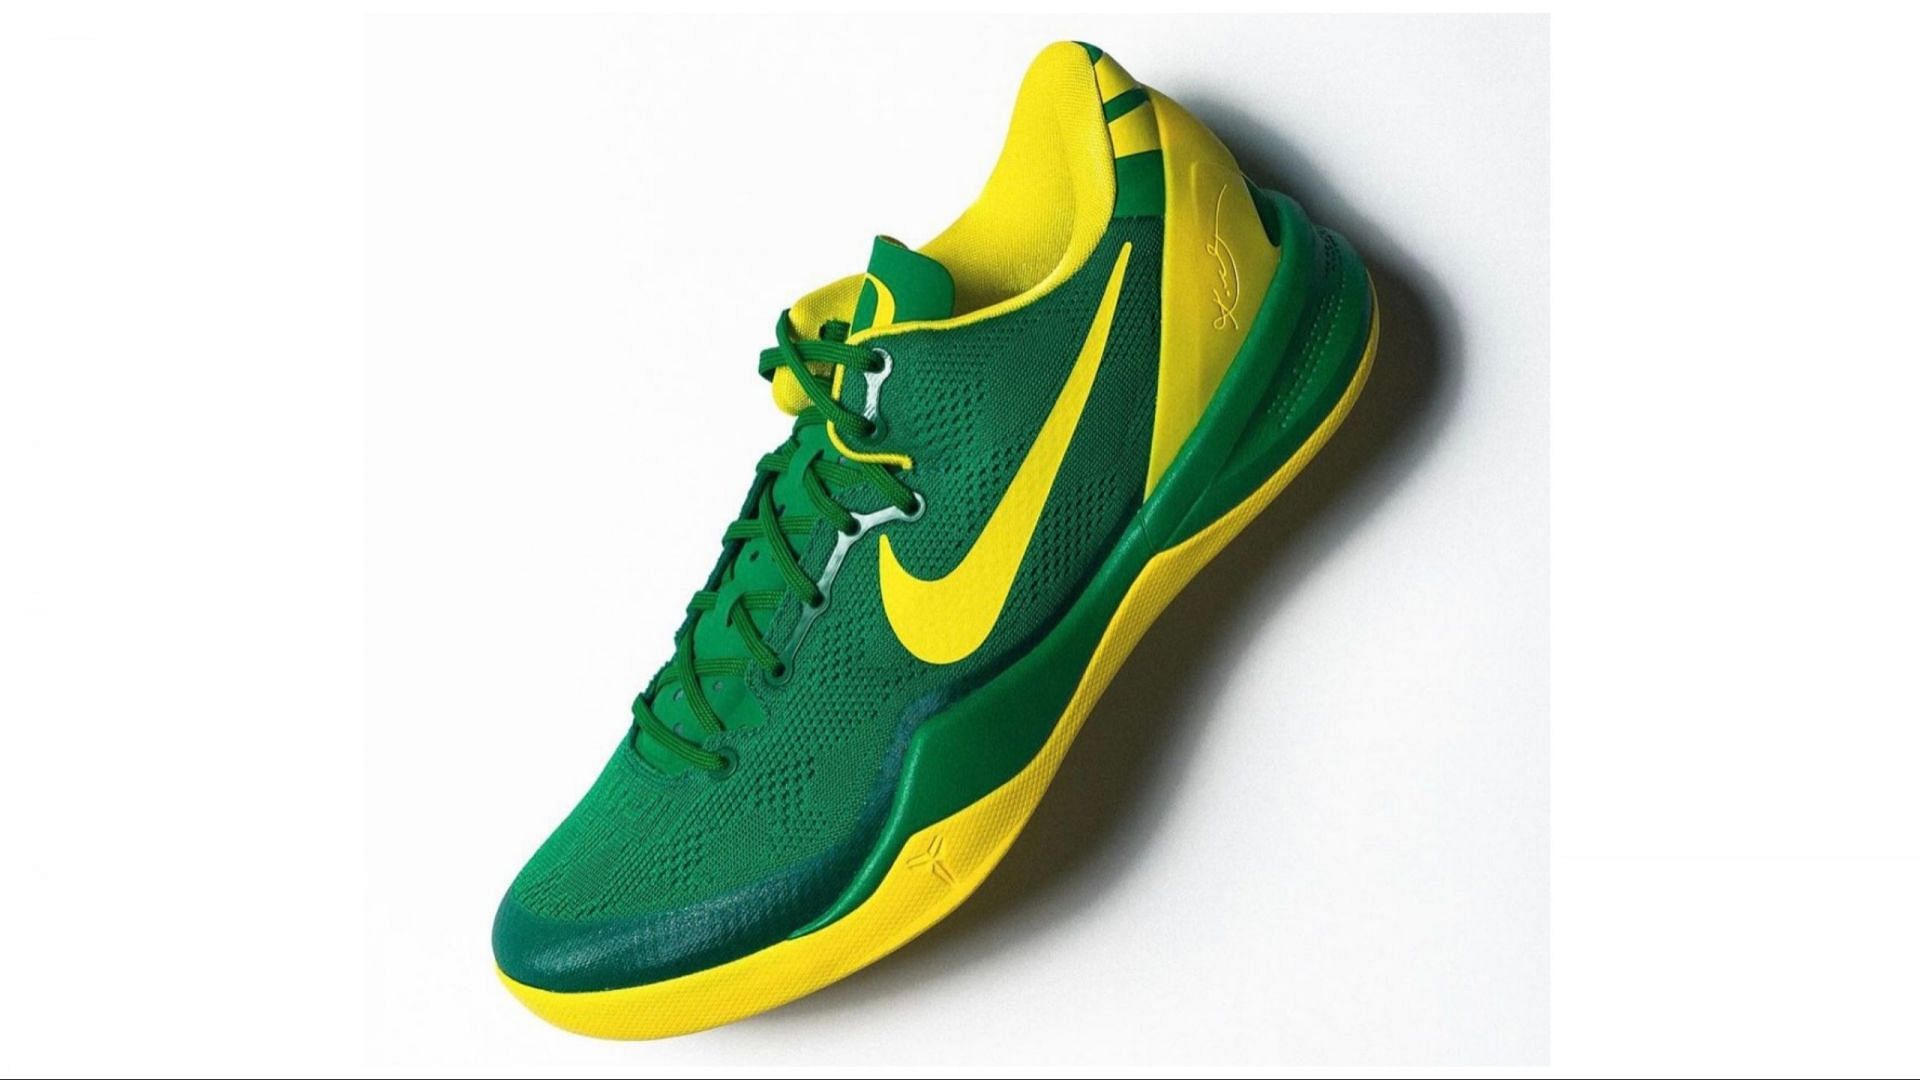 Nike Kobe 8 player exclusives gets awarded to Oregon